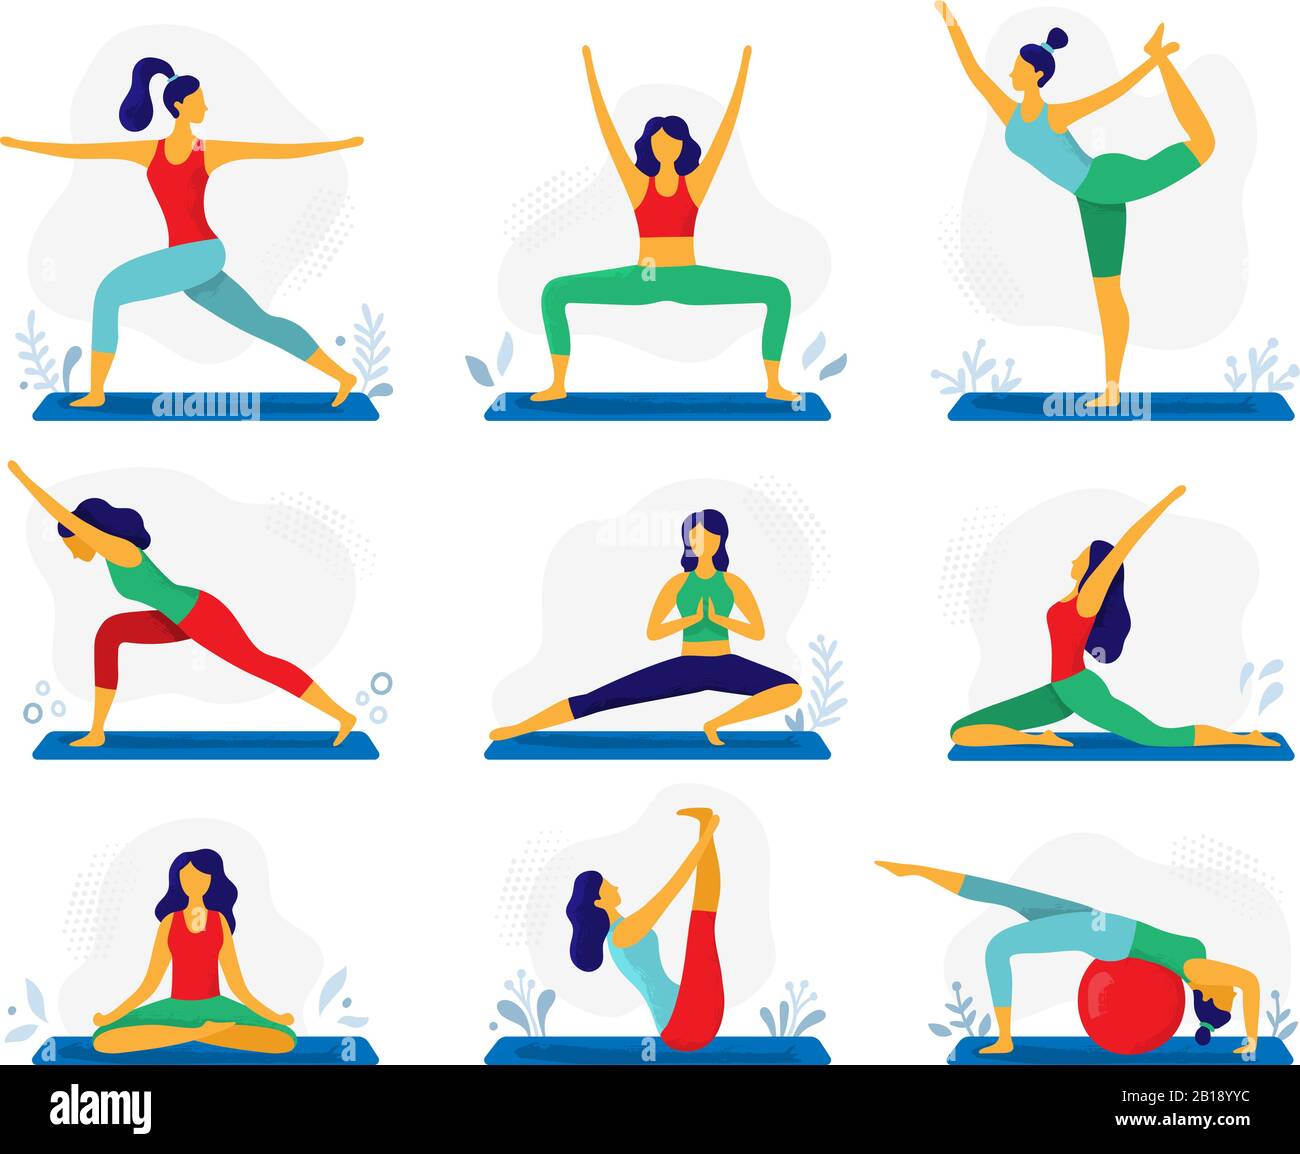 Yoga exercise. Fitness therapy, healthy stretch yoga poses and